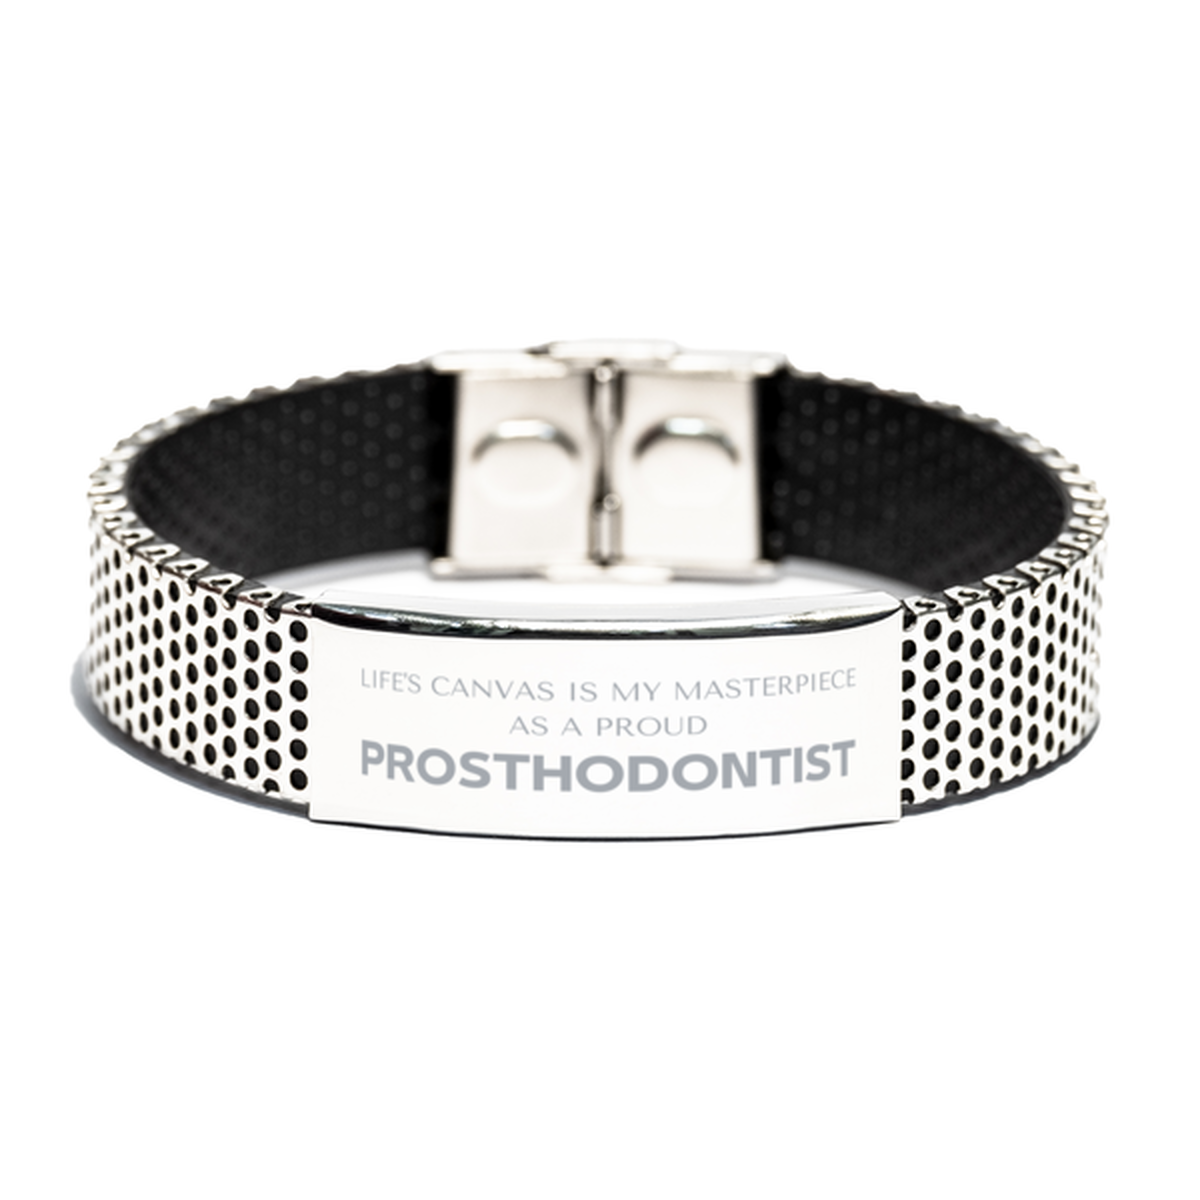 Proud Prosthodontist Gifts, Life's canvas is my masterpiece, Epic Birthday Christmas Unique Stainless Steel Bracelet For Prosthodontist, Coworkers, Men, Women, Friends